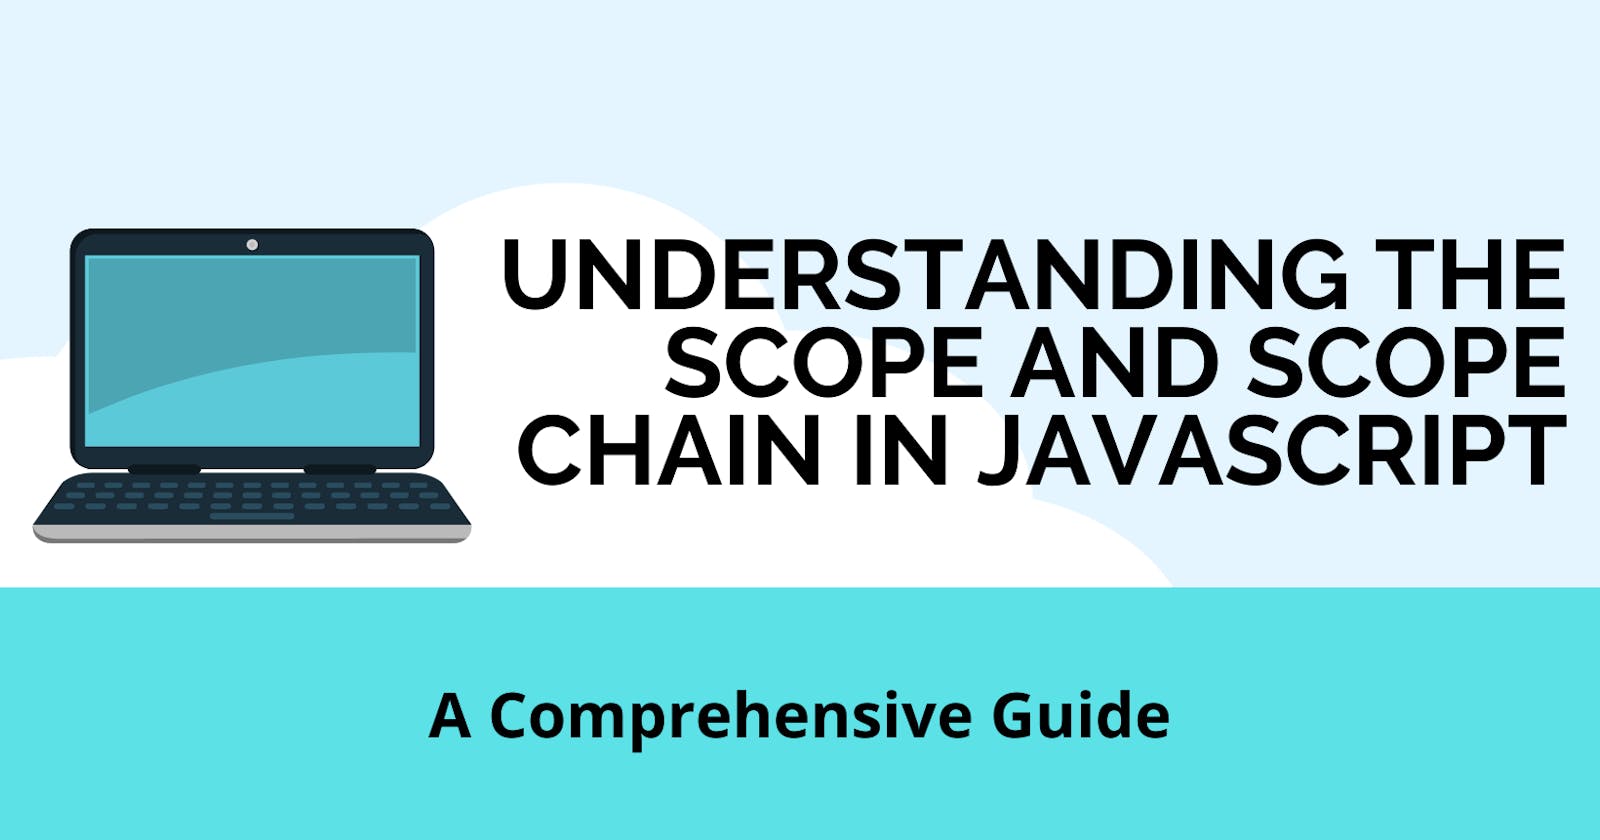 Understanding the Scope and Scope Chain in JavaScript: A Comprehensive Guide